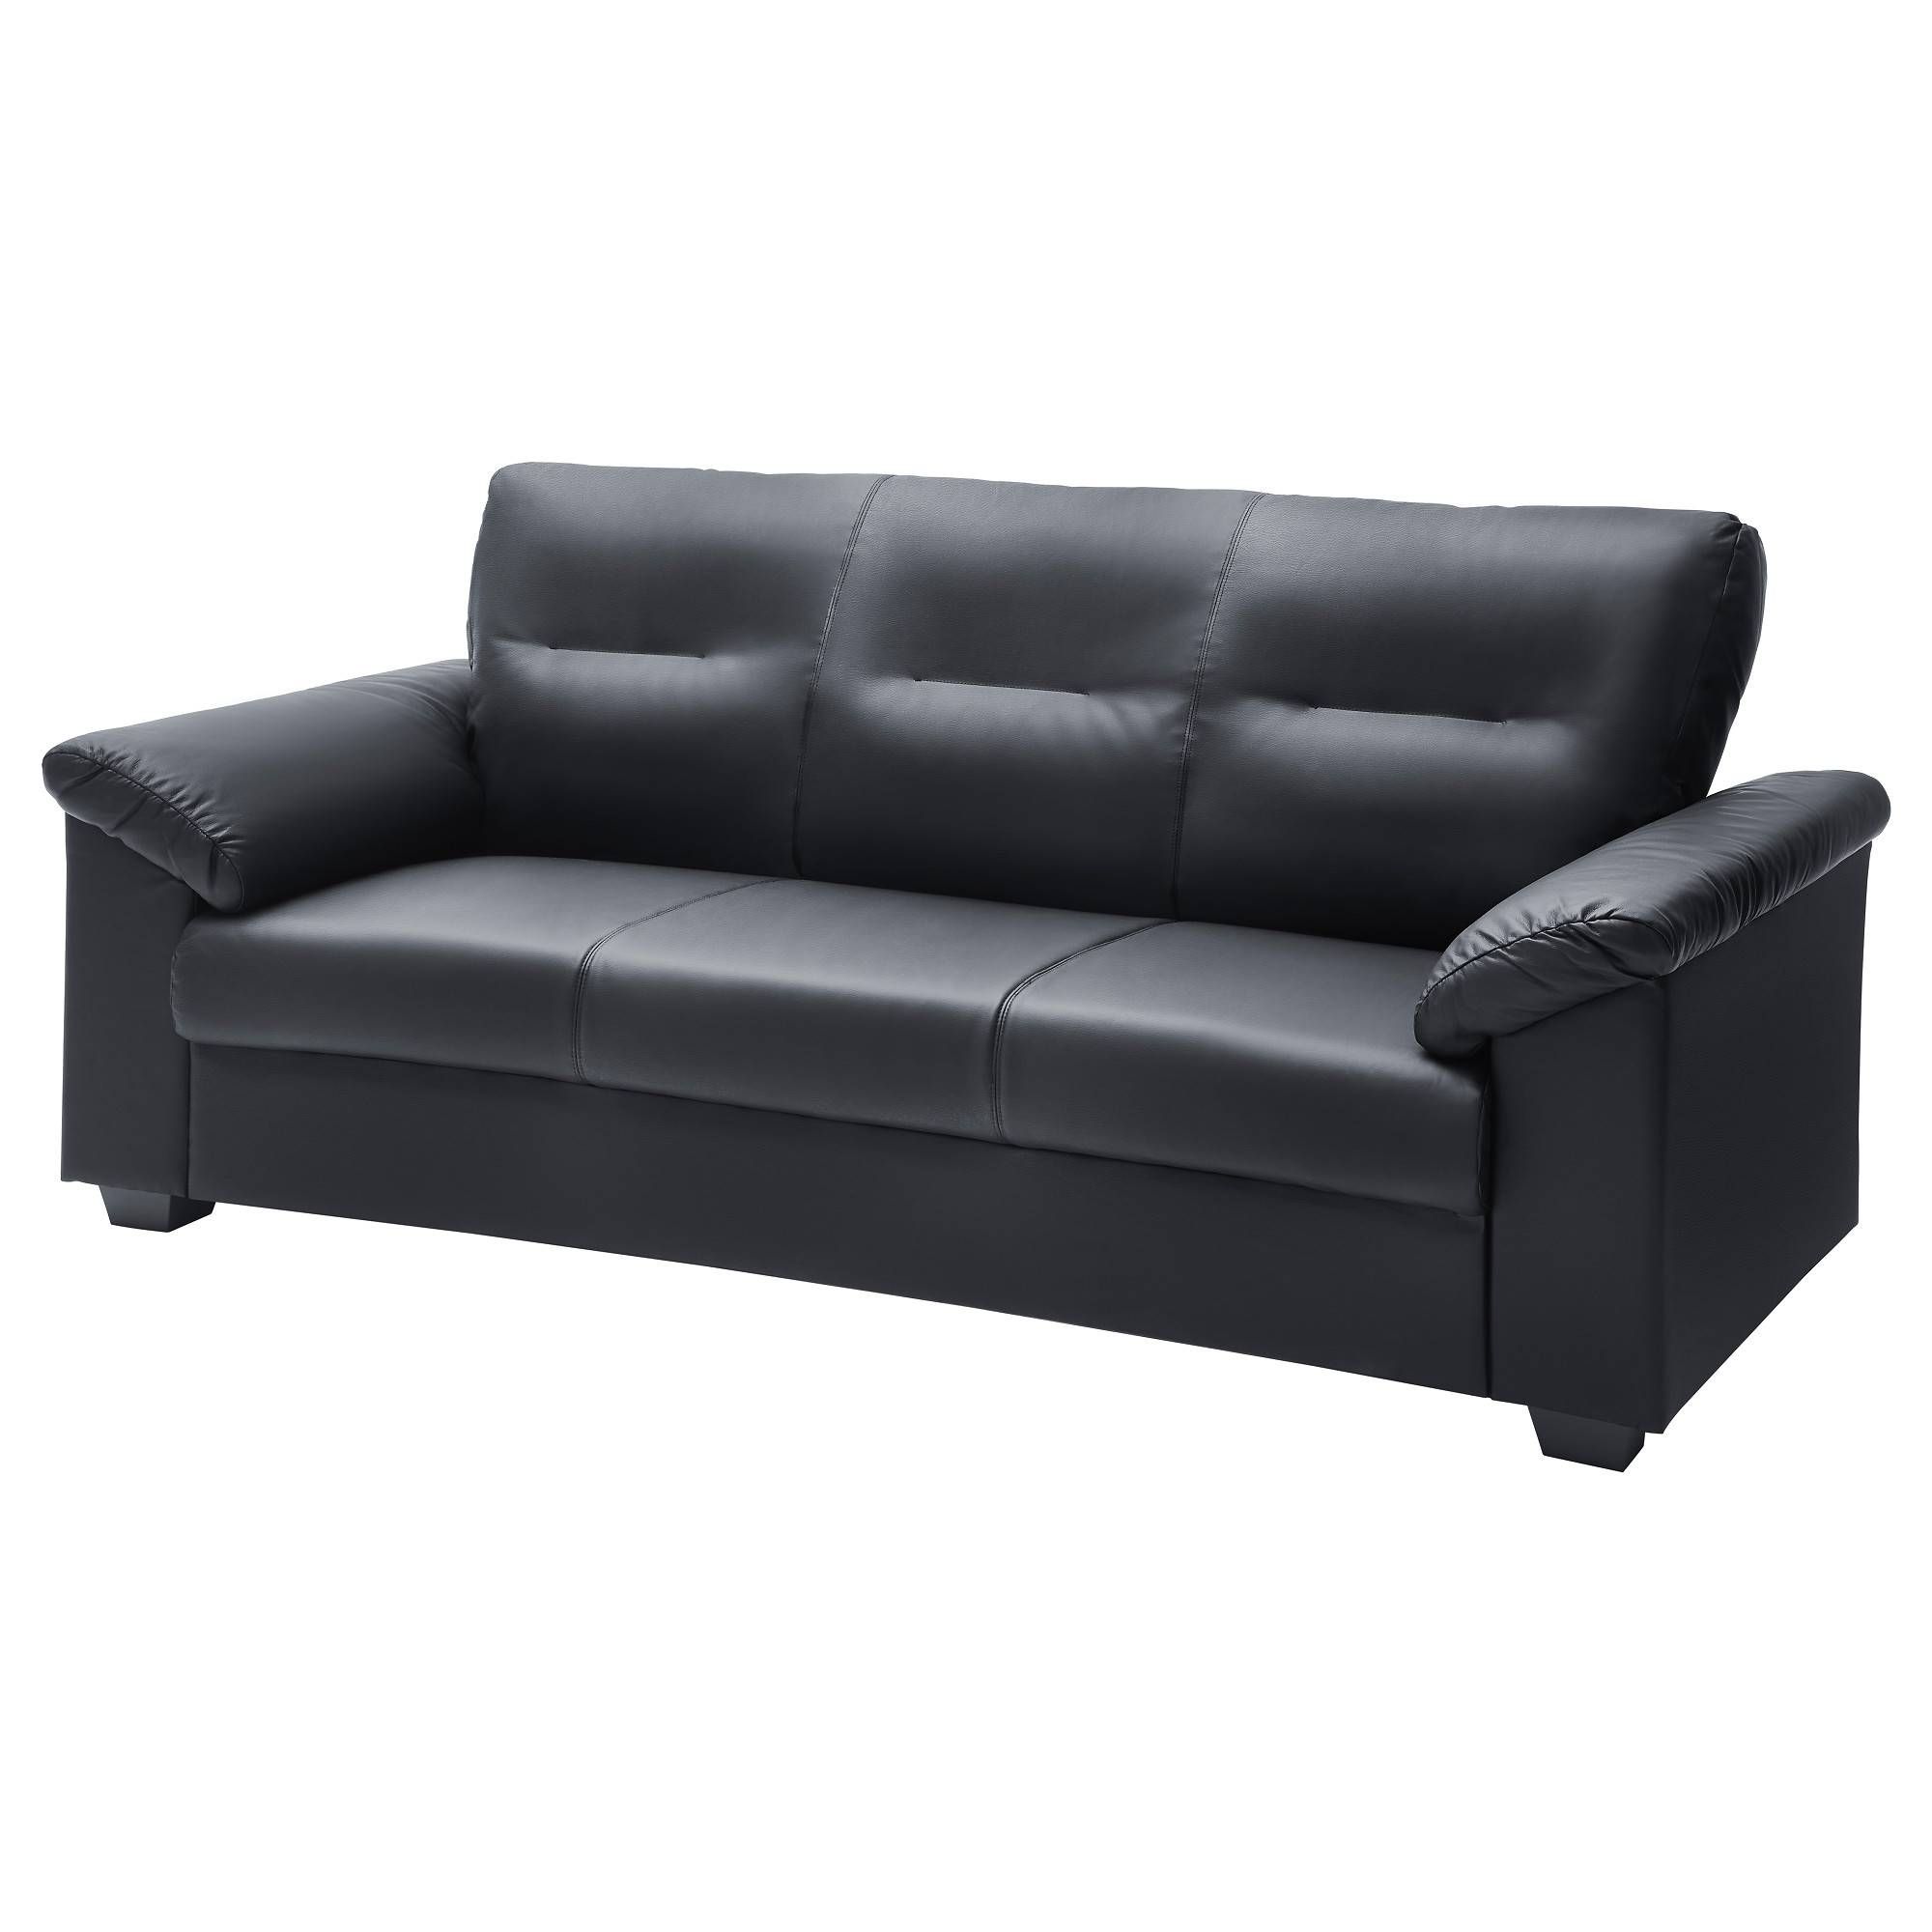 Unique Modern Black Leather Sofa 55 Contemporary Sofa Inspiration Pertaining To Contemporary Black Leather Sofas (View 4 of 30)